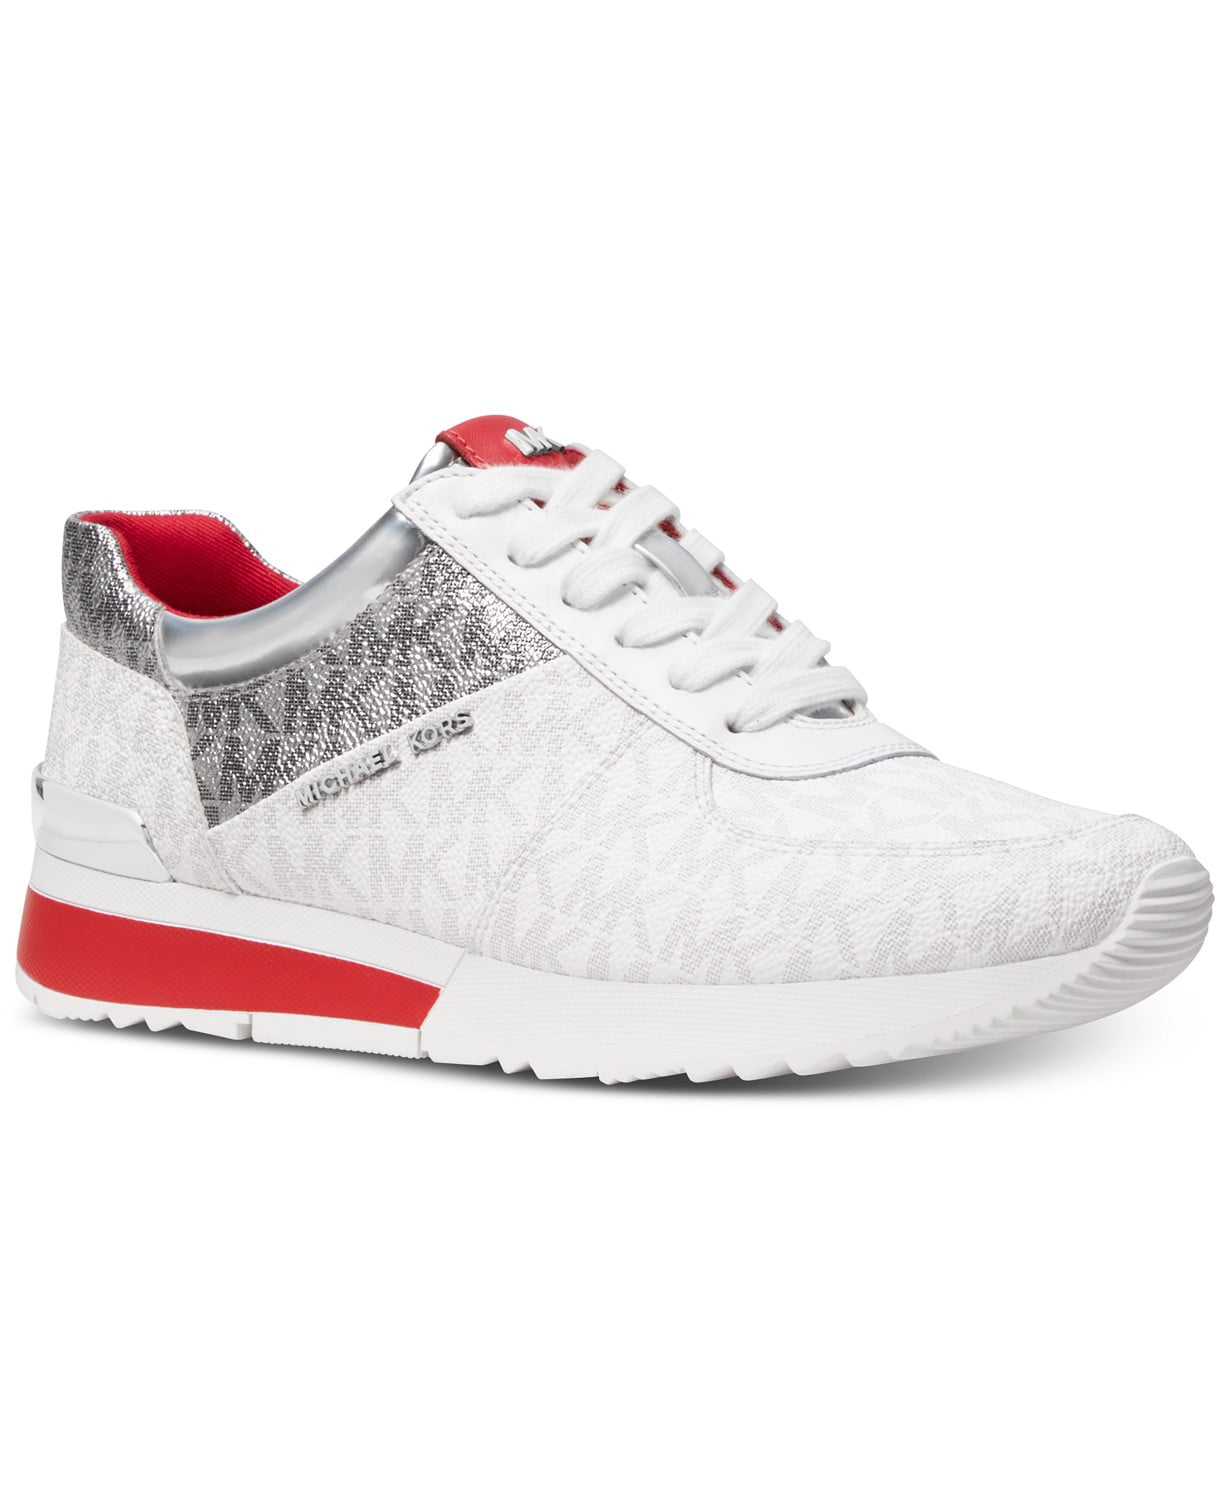 red and white gym shoes